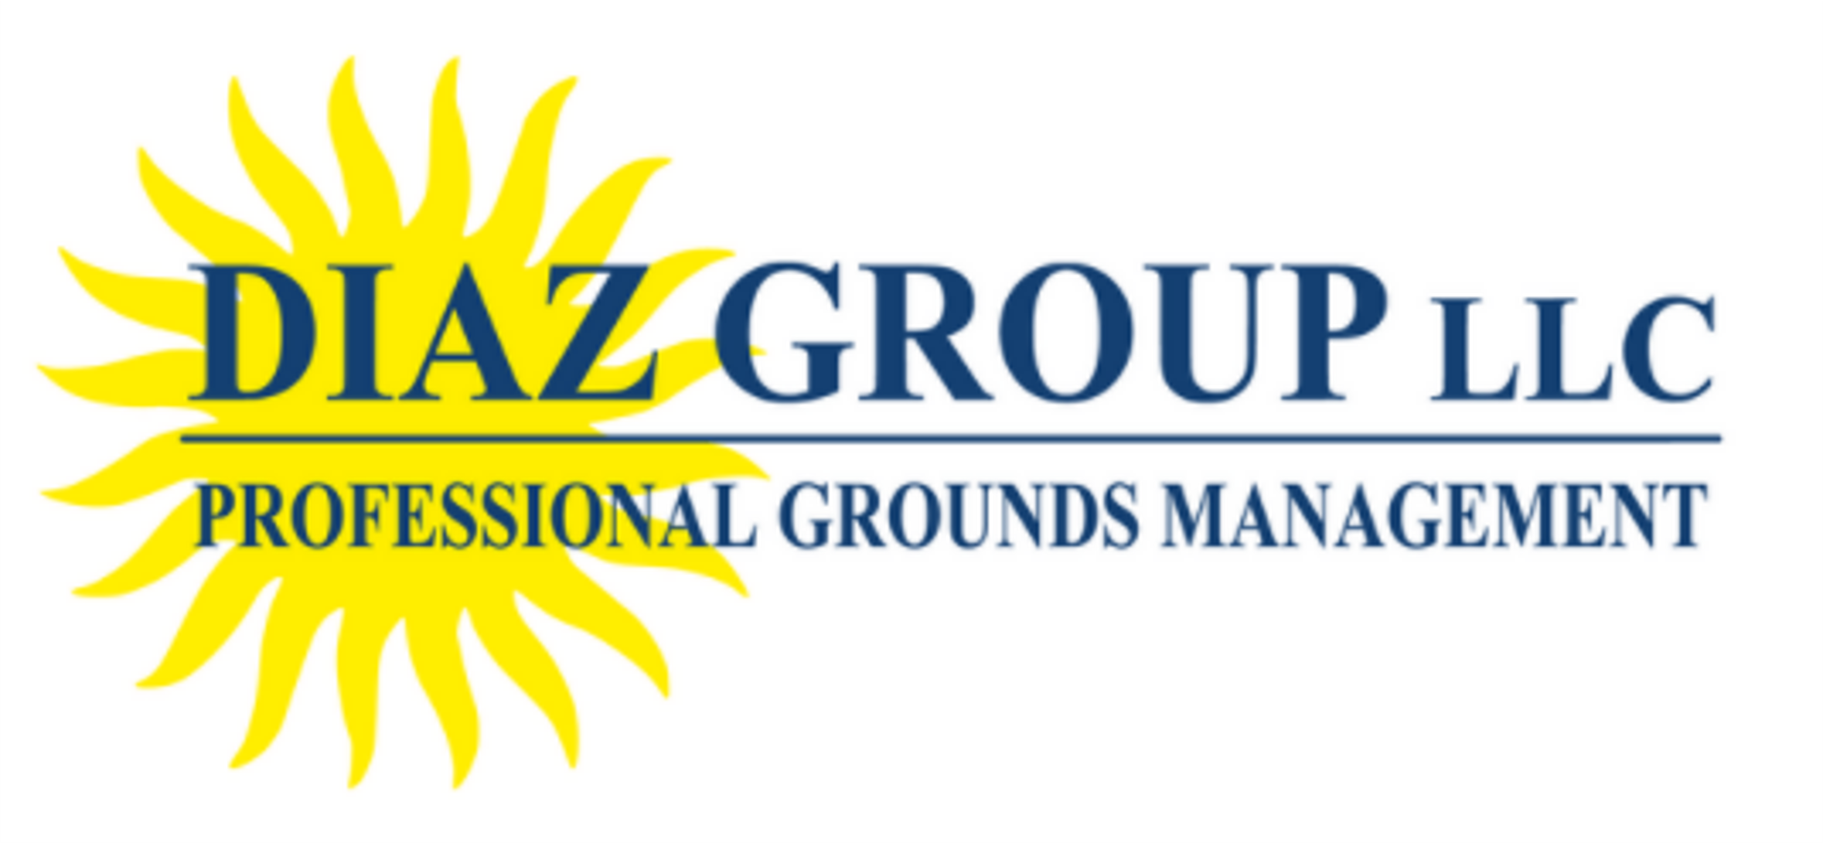 Diaz Group: Commercial Landscaping | Snow Removal